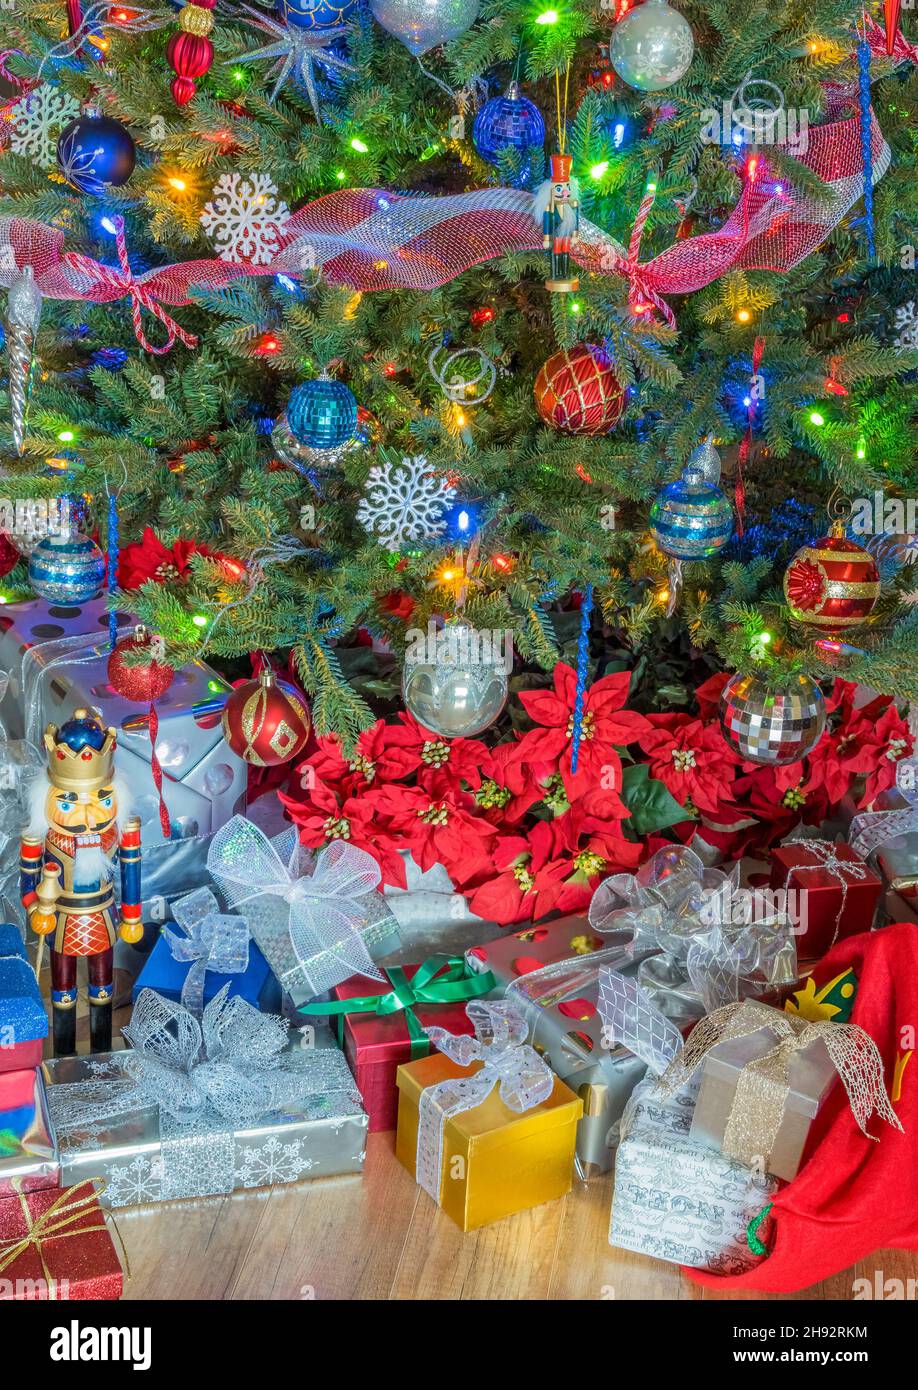 Red, white and blue decorations fill a Christmas tree and a pile of Christmas packages with Poinsettias sit under it's branches. A nutcracker guards i Stock Photo